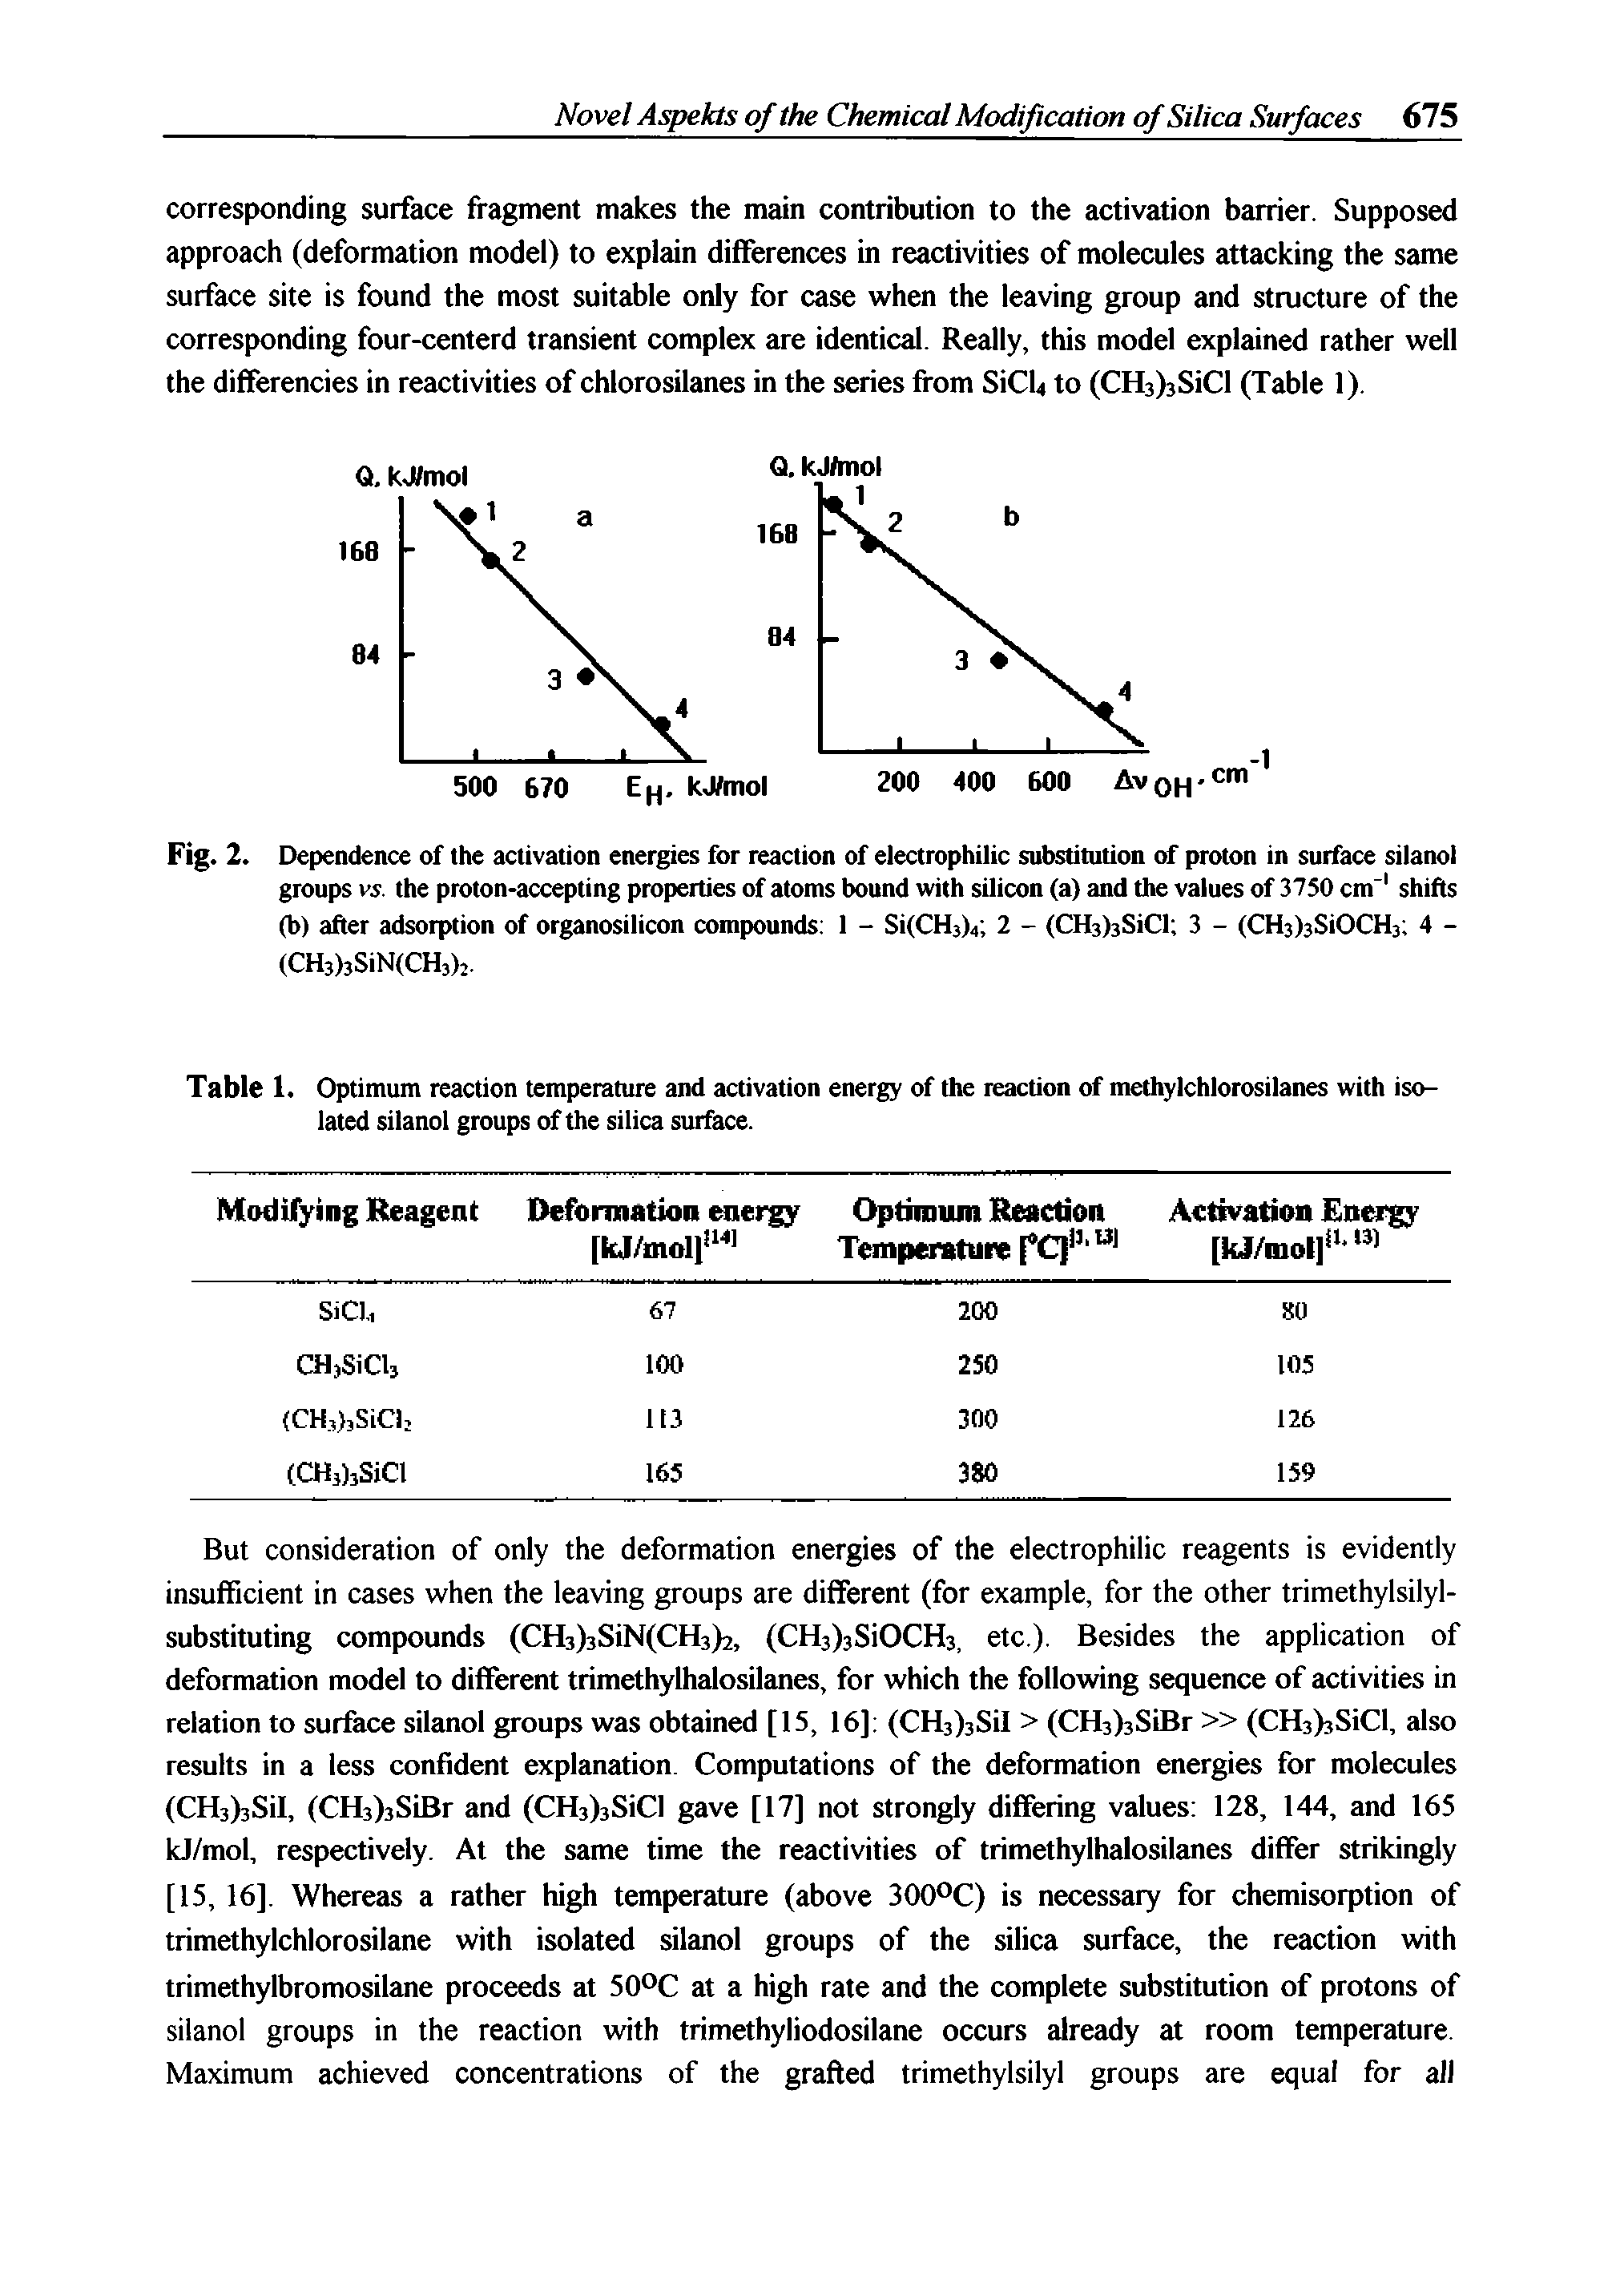 Table 1. Optimum reaction temperature and activation energy of the reaction of methylchlorosilanes with isolated silanol groups of the silica surface.